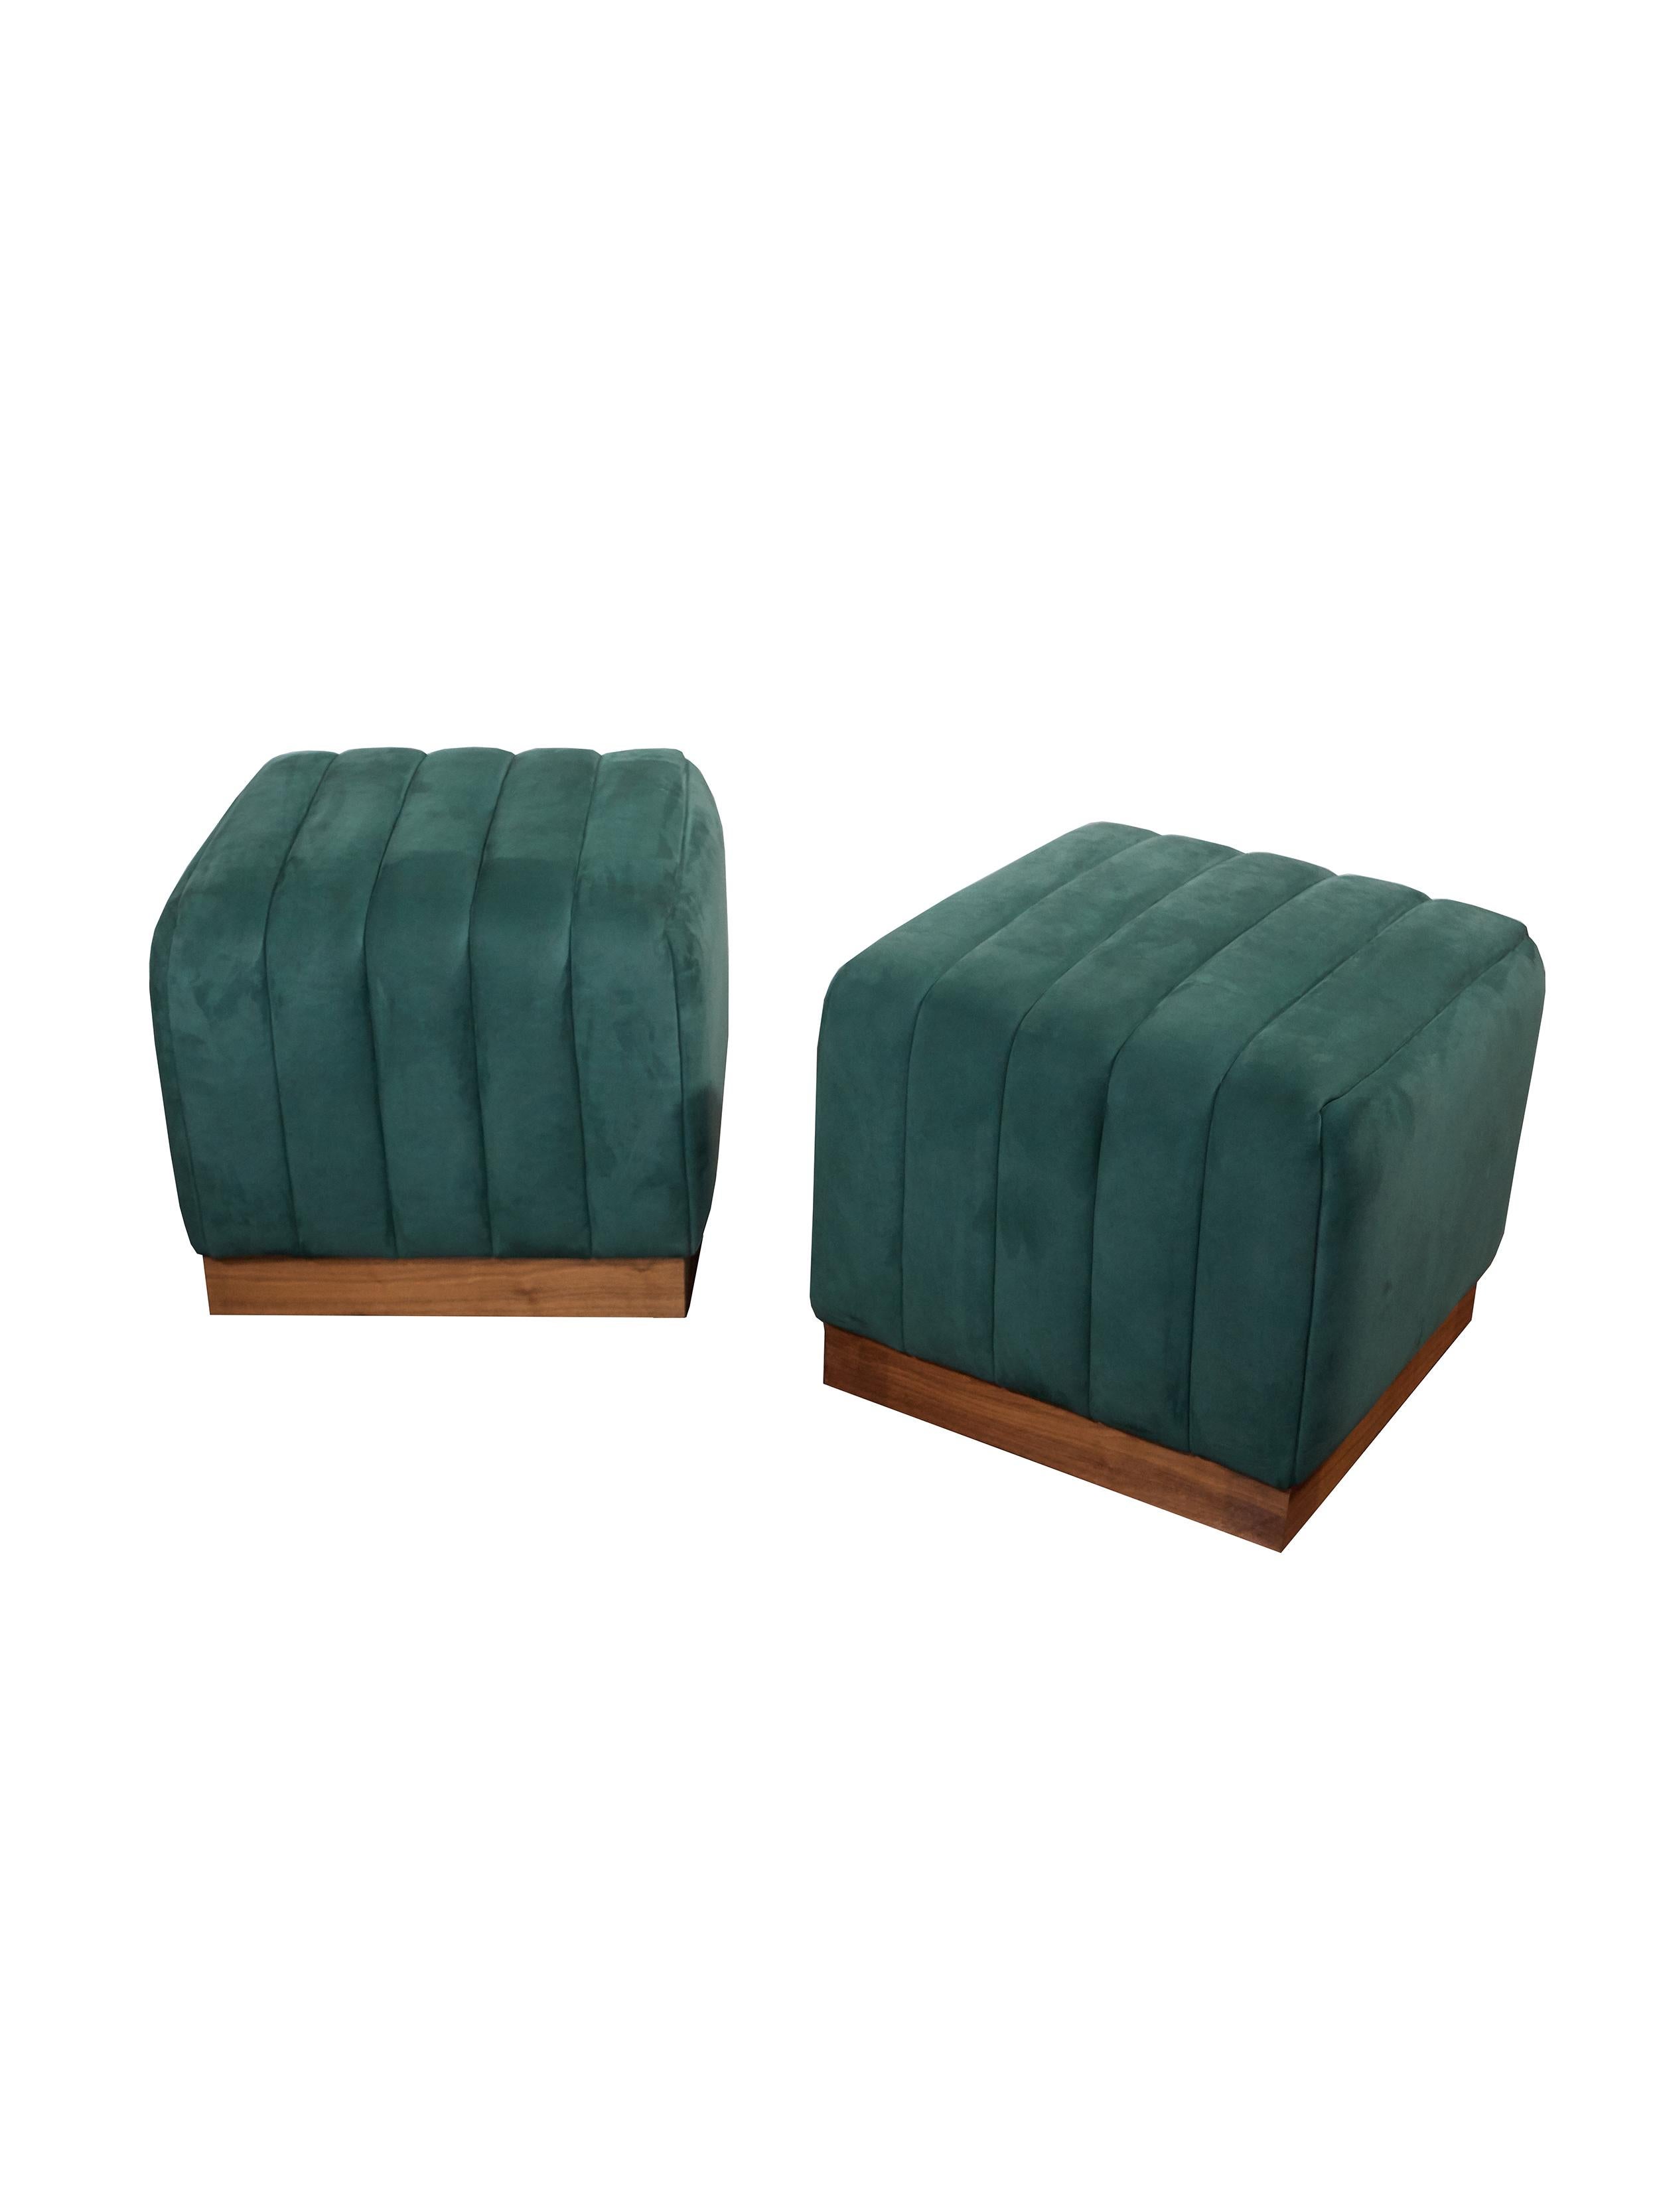 A modern ottoman with a clean silhouette, narrow channel detailing and walnut base. This fully-upholstered ottoman shown in hunter green nubuck leather is available in a variety of colored nubuck leathers. COM available.